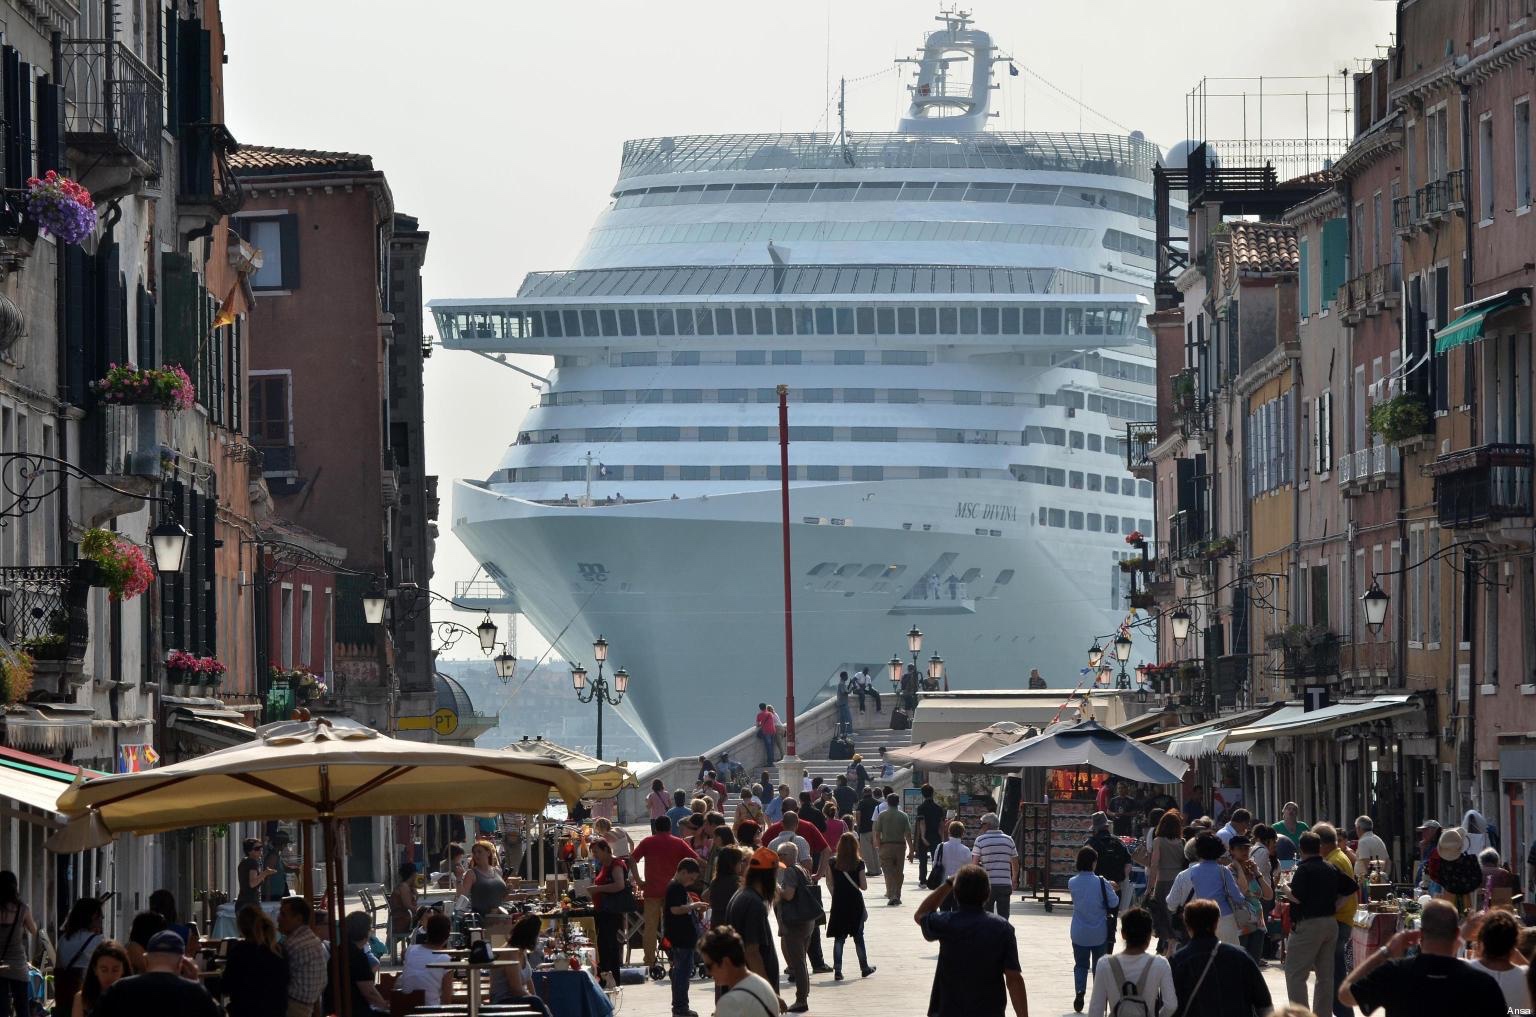 Cruise Ship at Dock in Italy